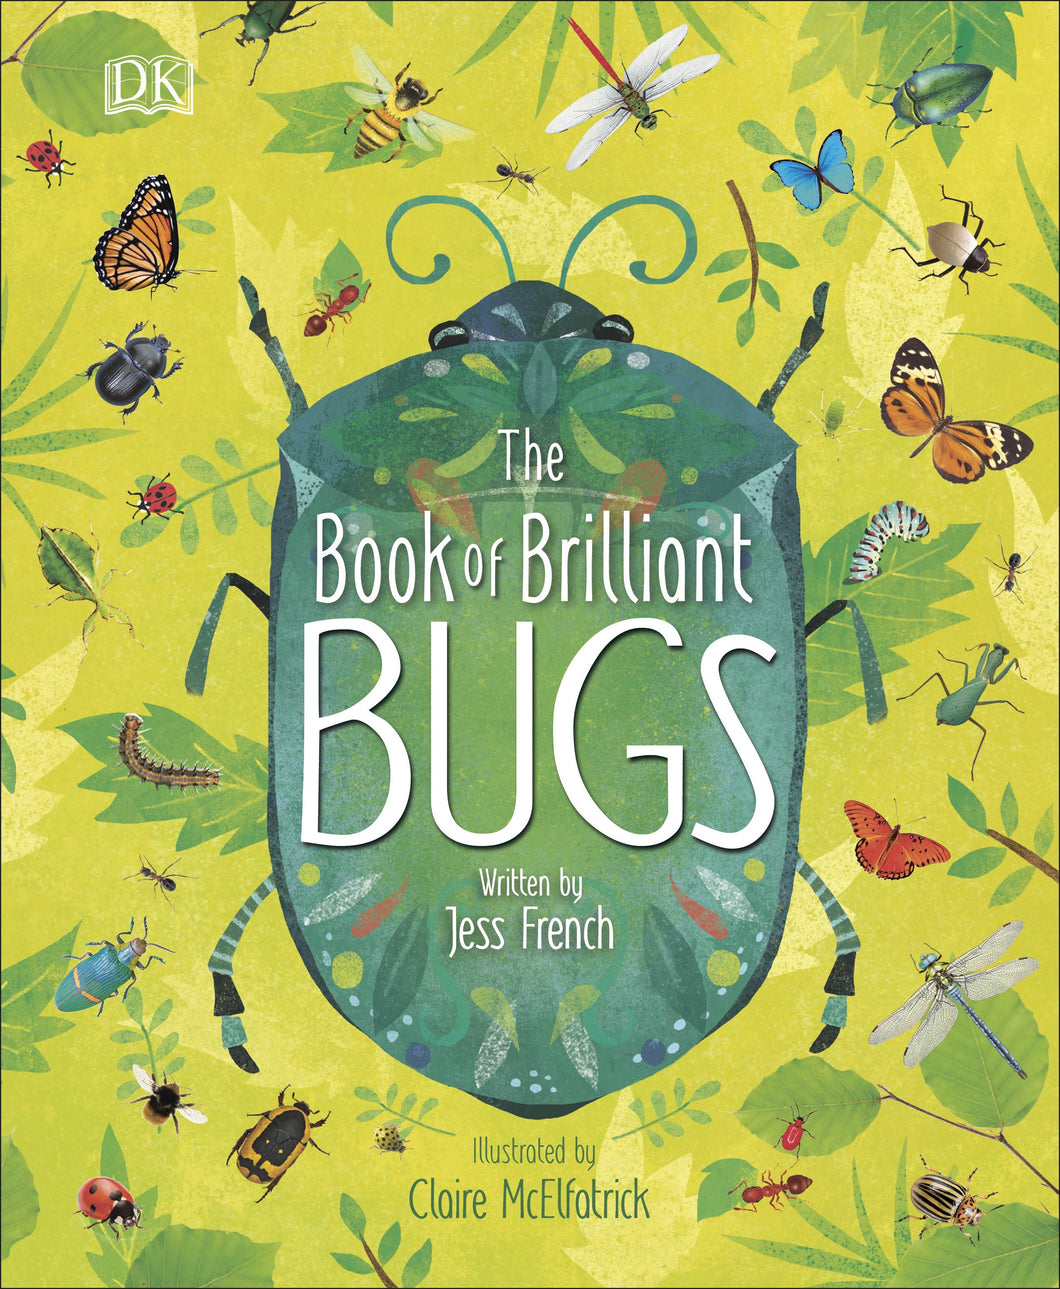 The Book of Brilliant Bugs - Things They Love